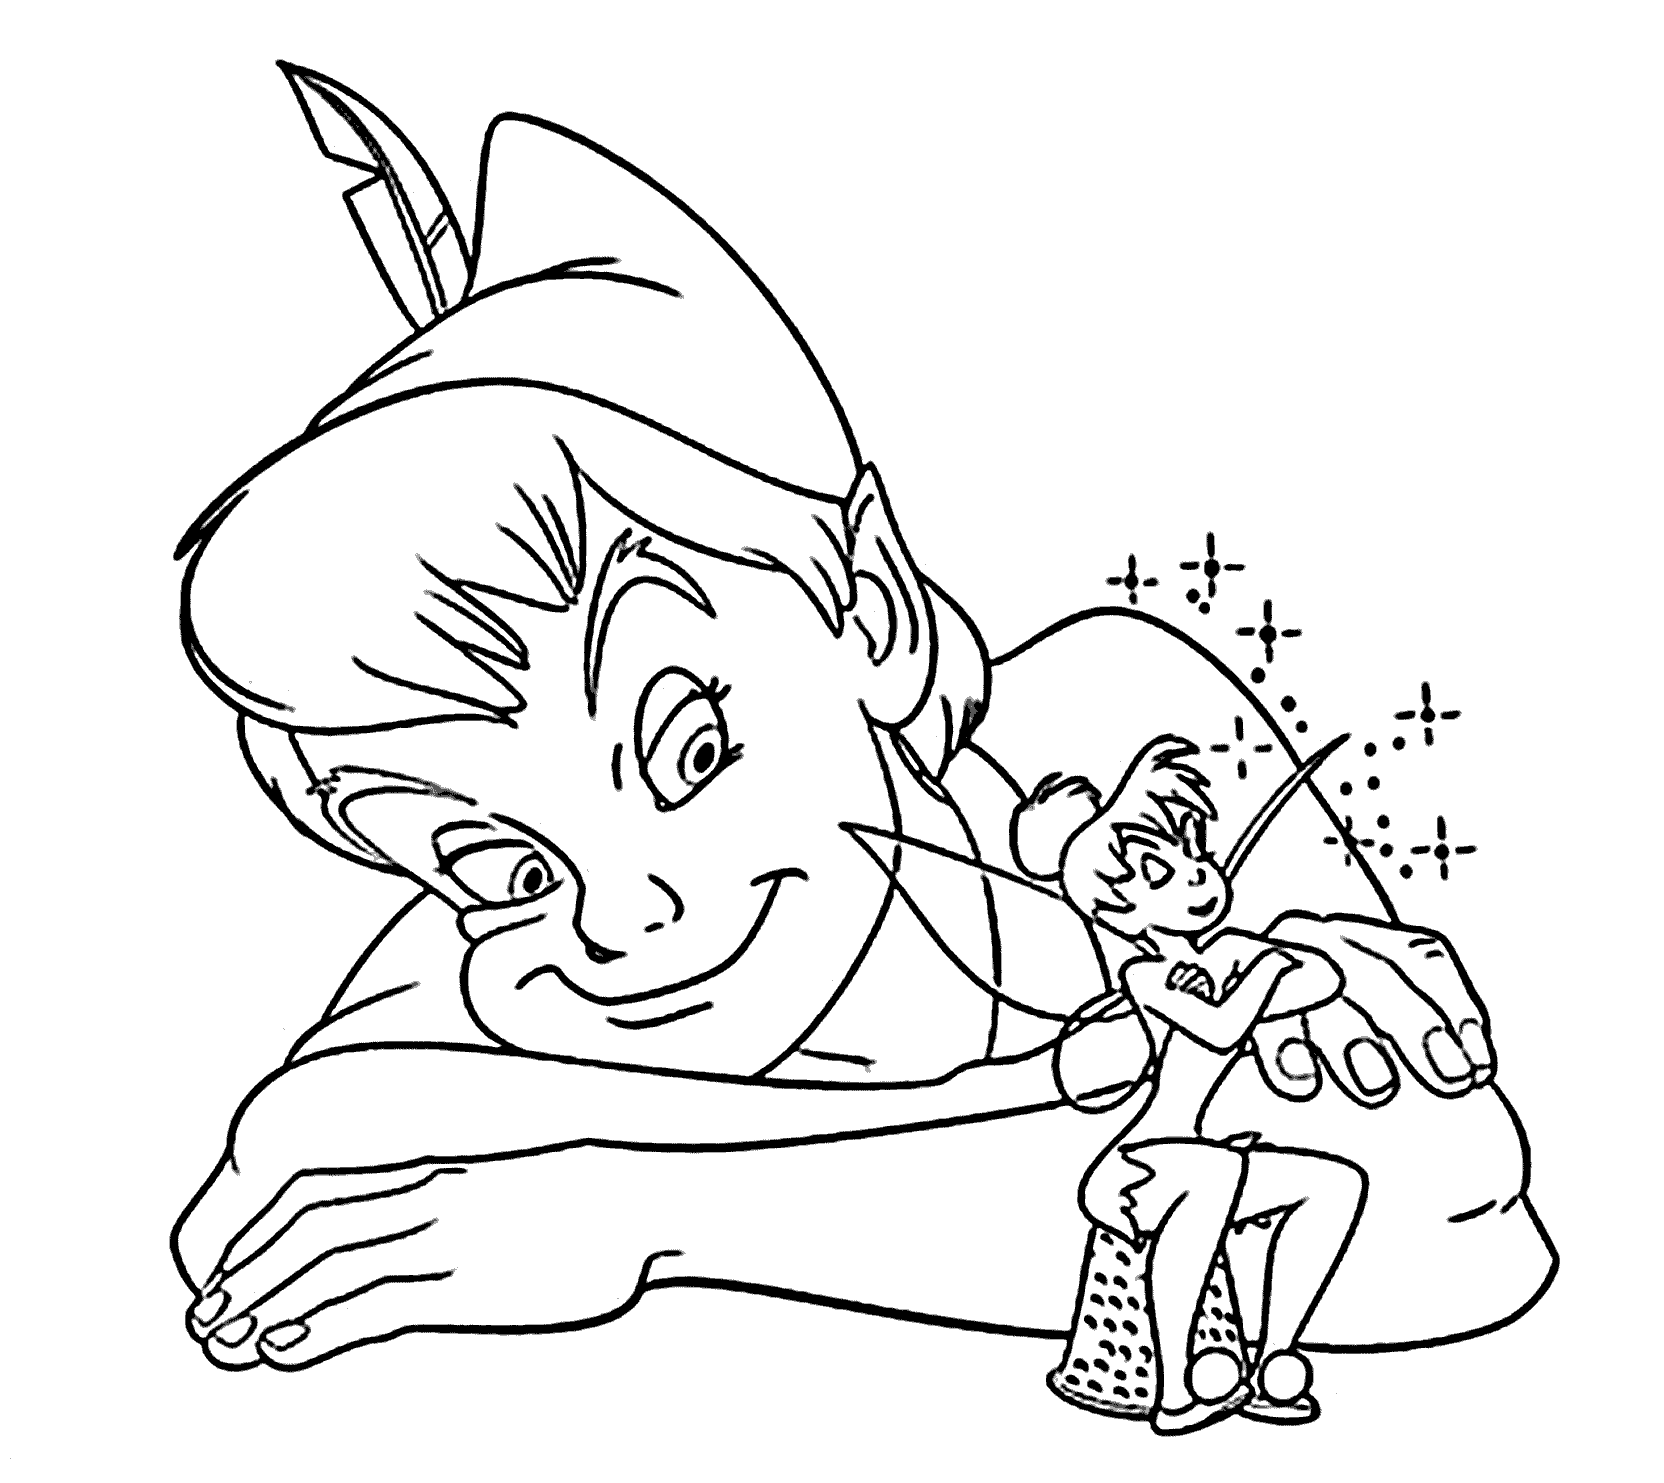 Peter Pan Flying Coloring Pages - Coloring Page